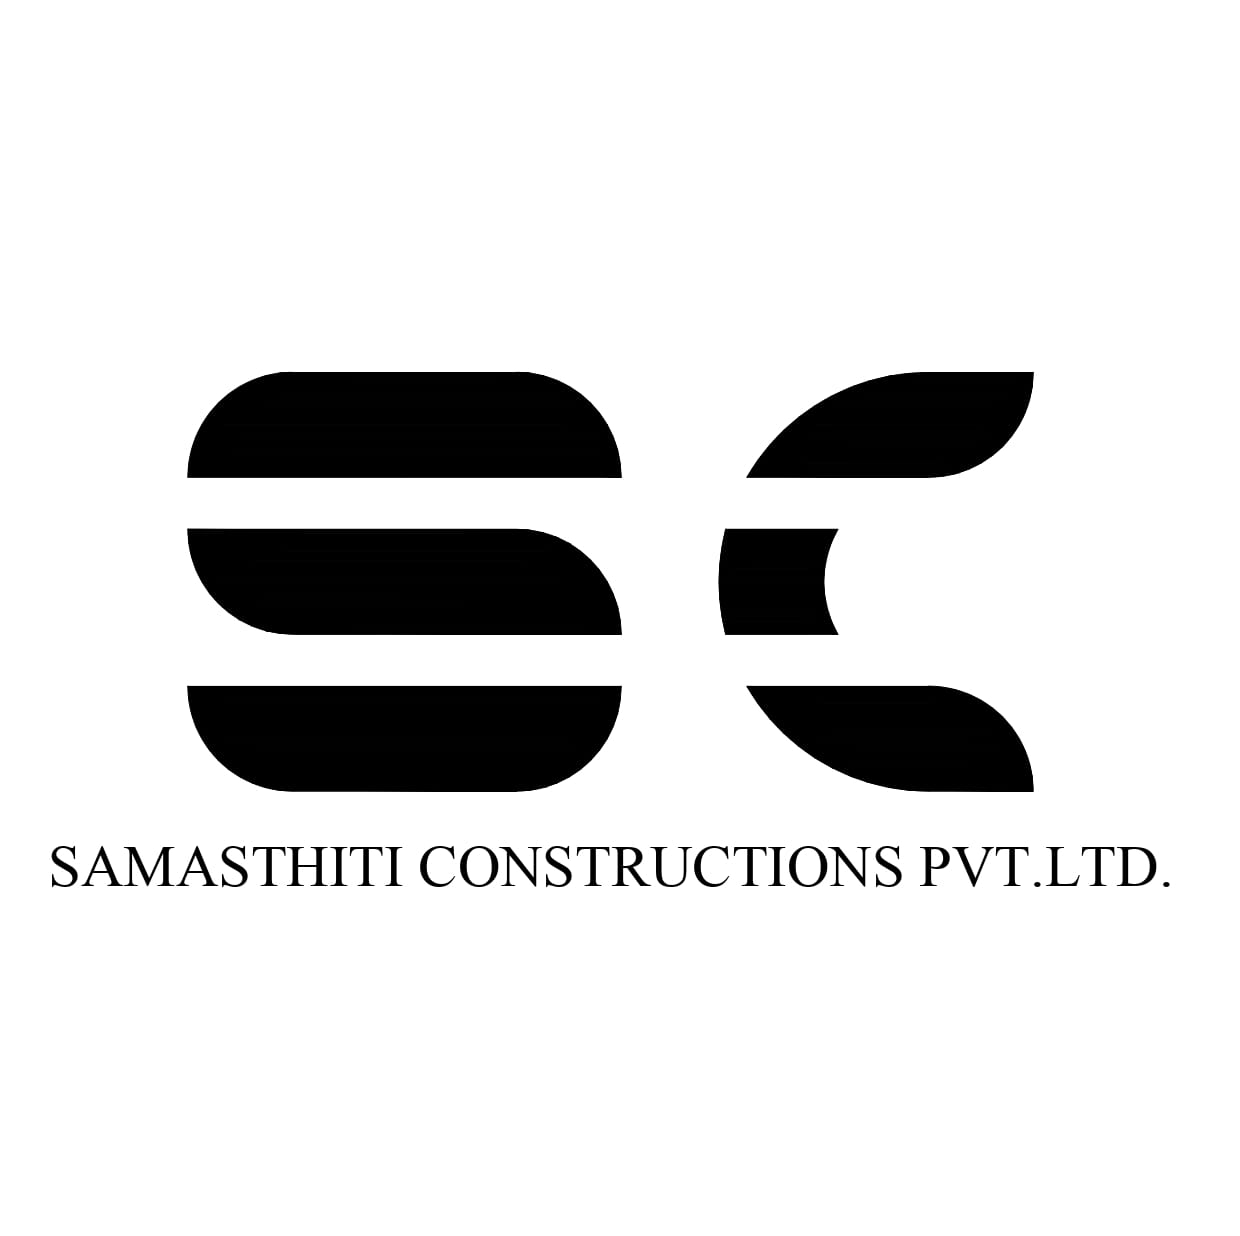 Samasthiti Constructions Pvt.Ltd|Accounting Services|Professional Services